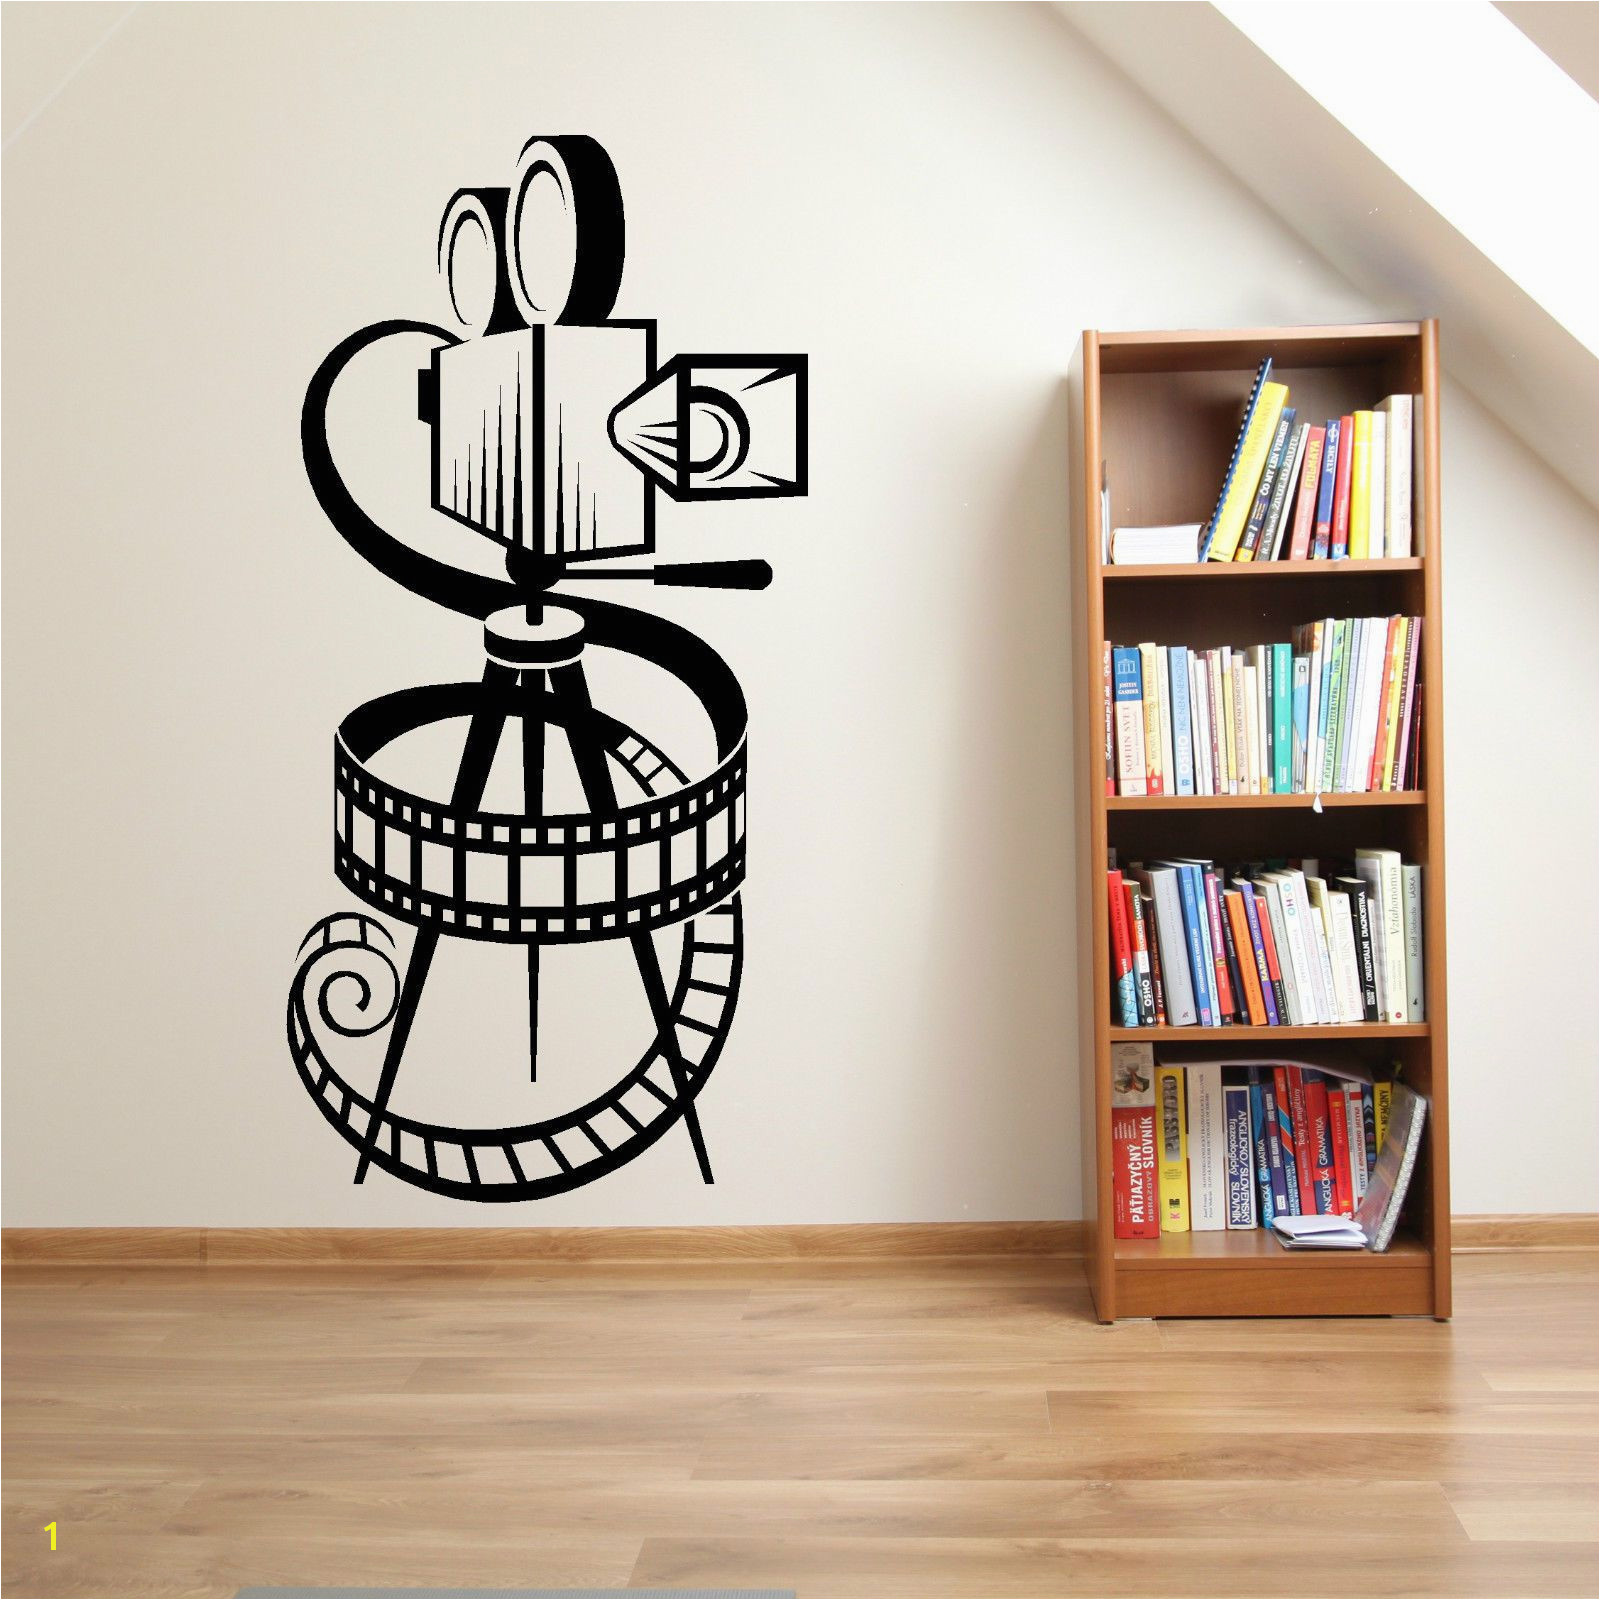 HWHD OS1693 MOVIE CAMERA FILM REEL HOME CINEMA VINTAGE THEATRE Vinyl Wall art sticker decal free shipping Yesterday s price US $12 90 10 57 EUR